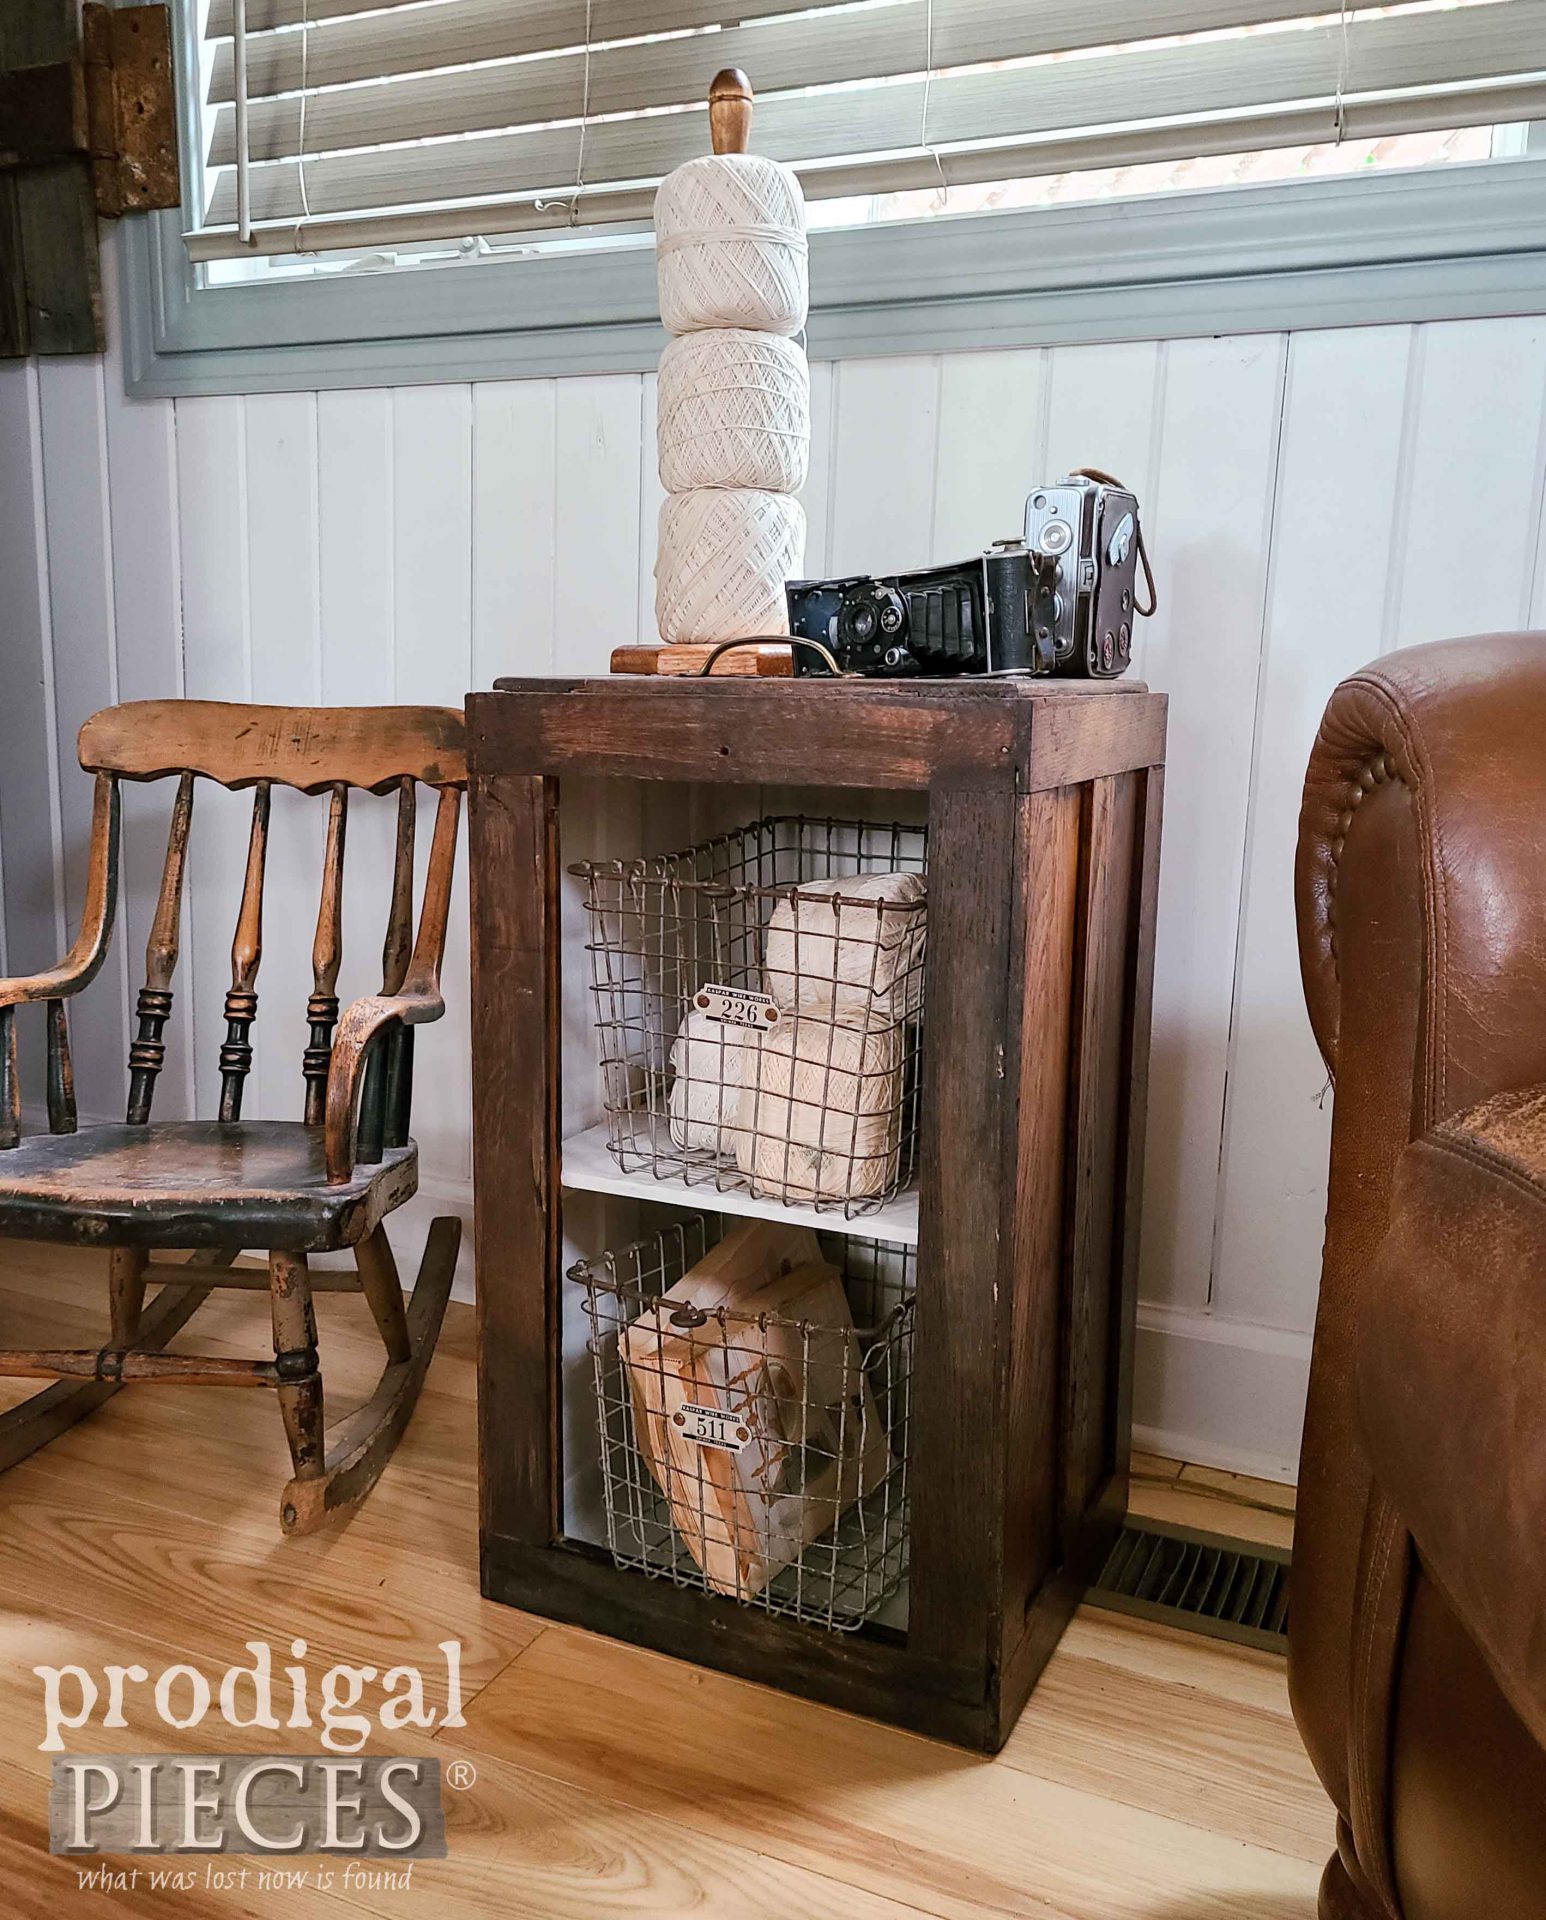 DIY Industrial Farmhouse Stand from Antique Filing Cabinet by Larissa of Prodigal Pieces | prodigalpieces.com #prodigalpieces #farmhouse #diy